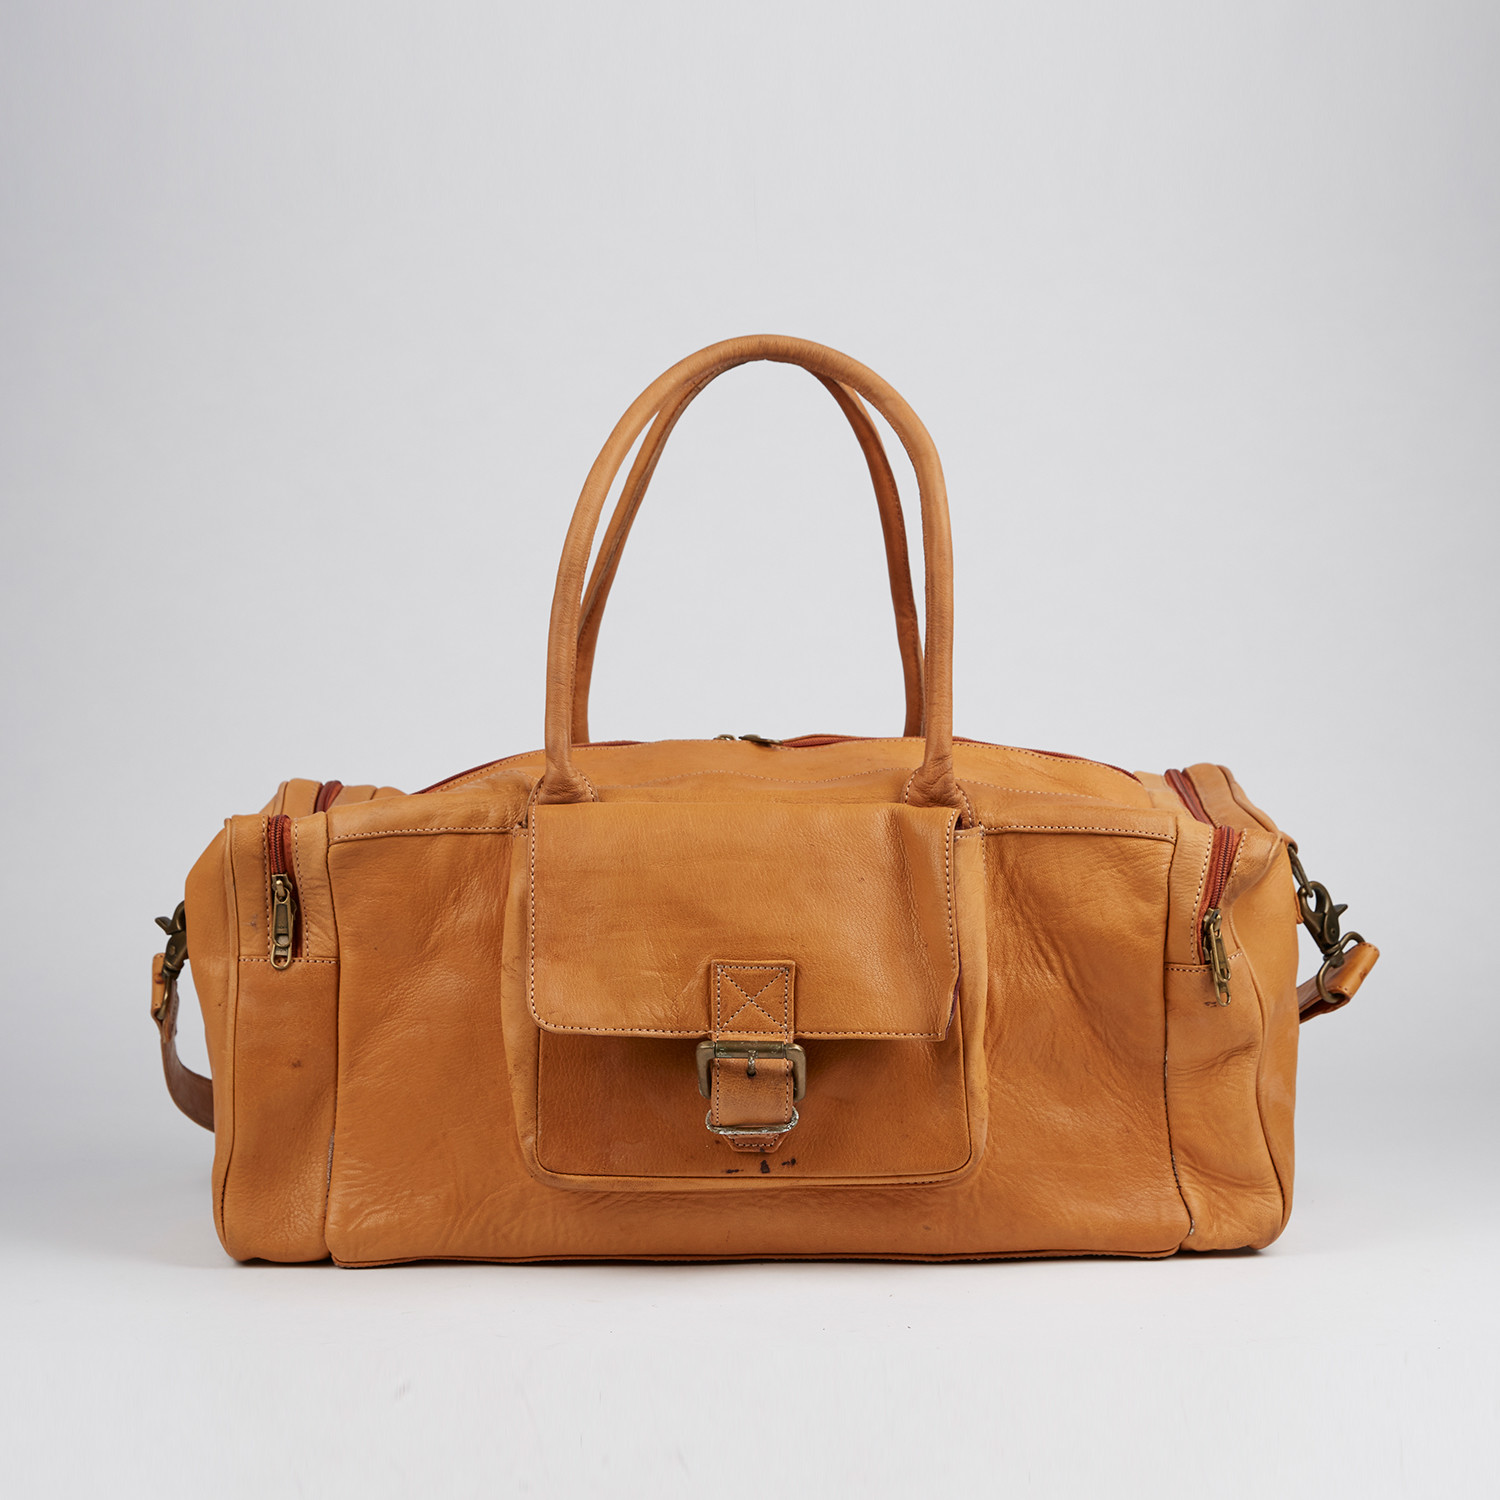 Vintage Duffle Bag - The Fair Share - Touch of Modern